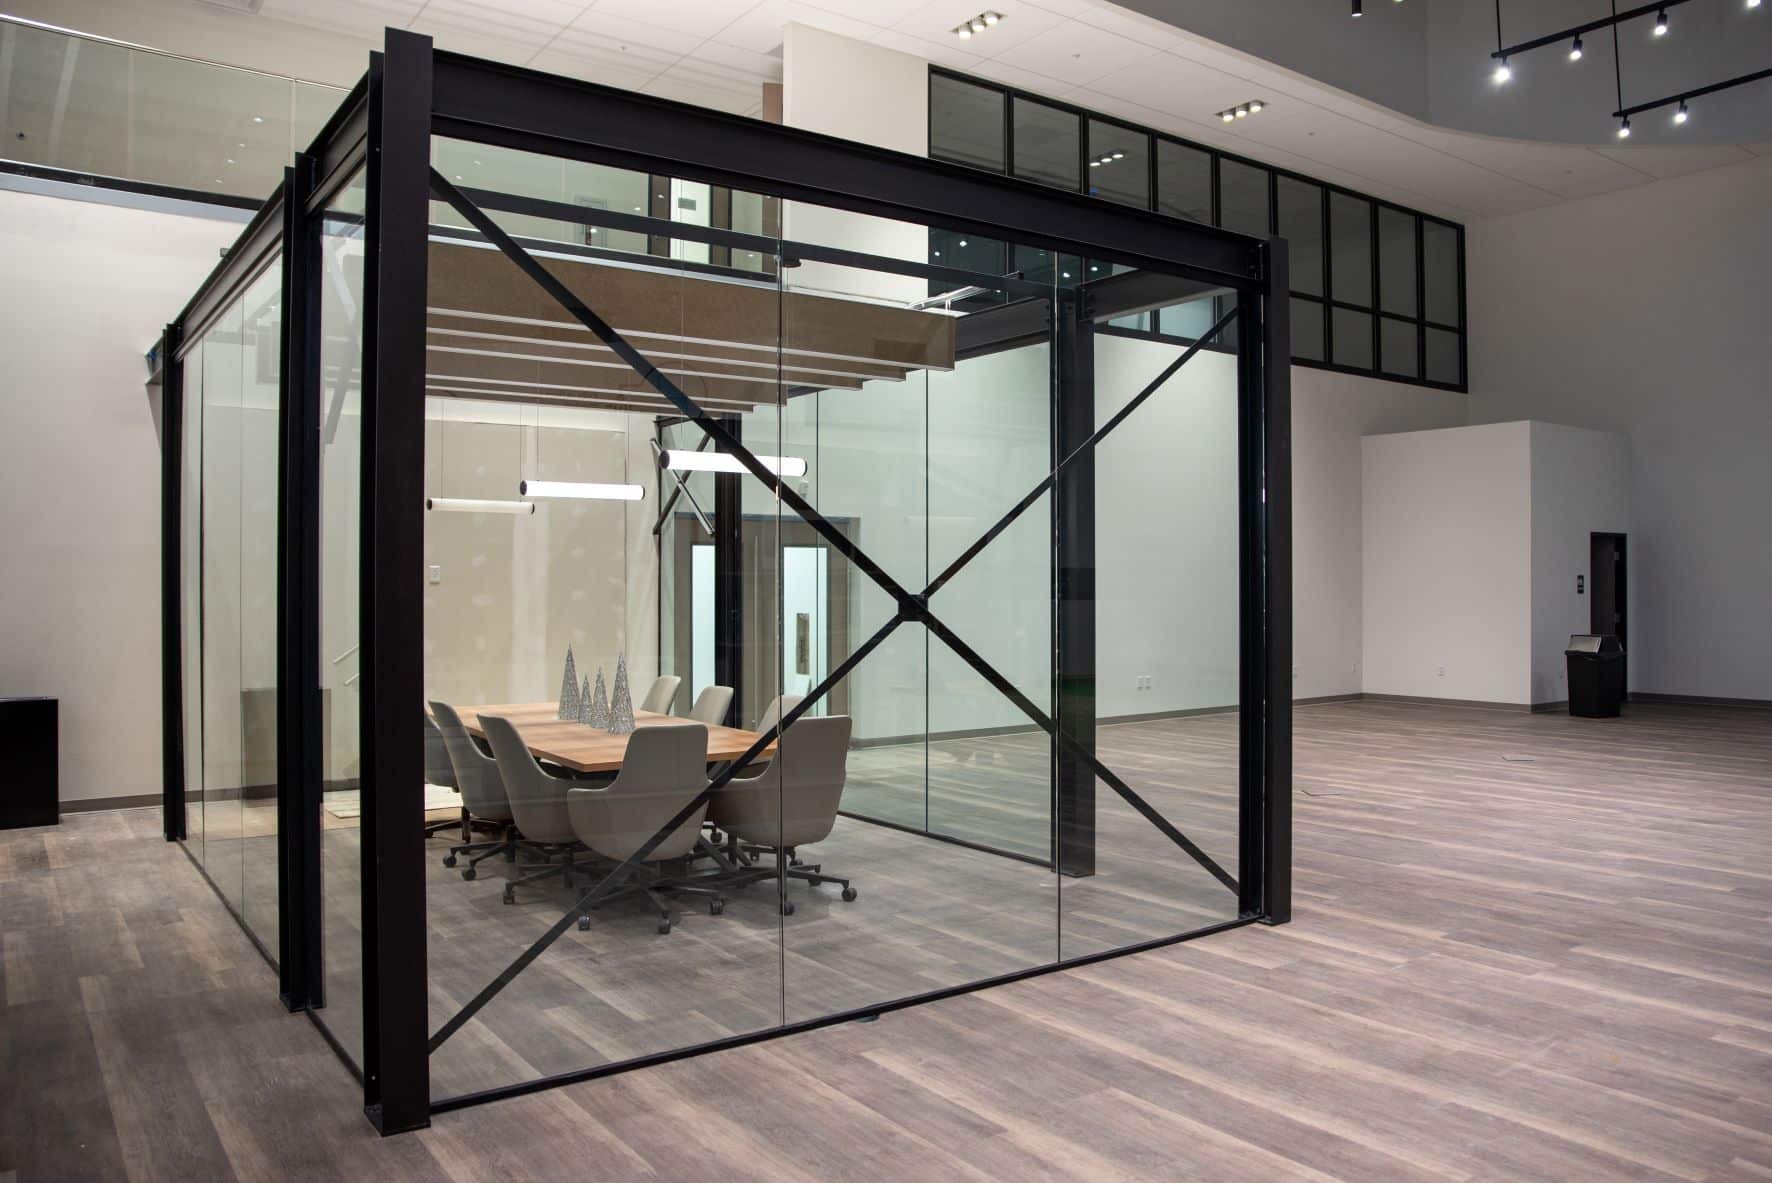 glass-walled conference room with hanging lights and conference table